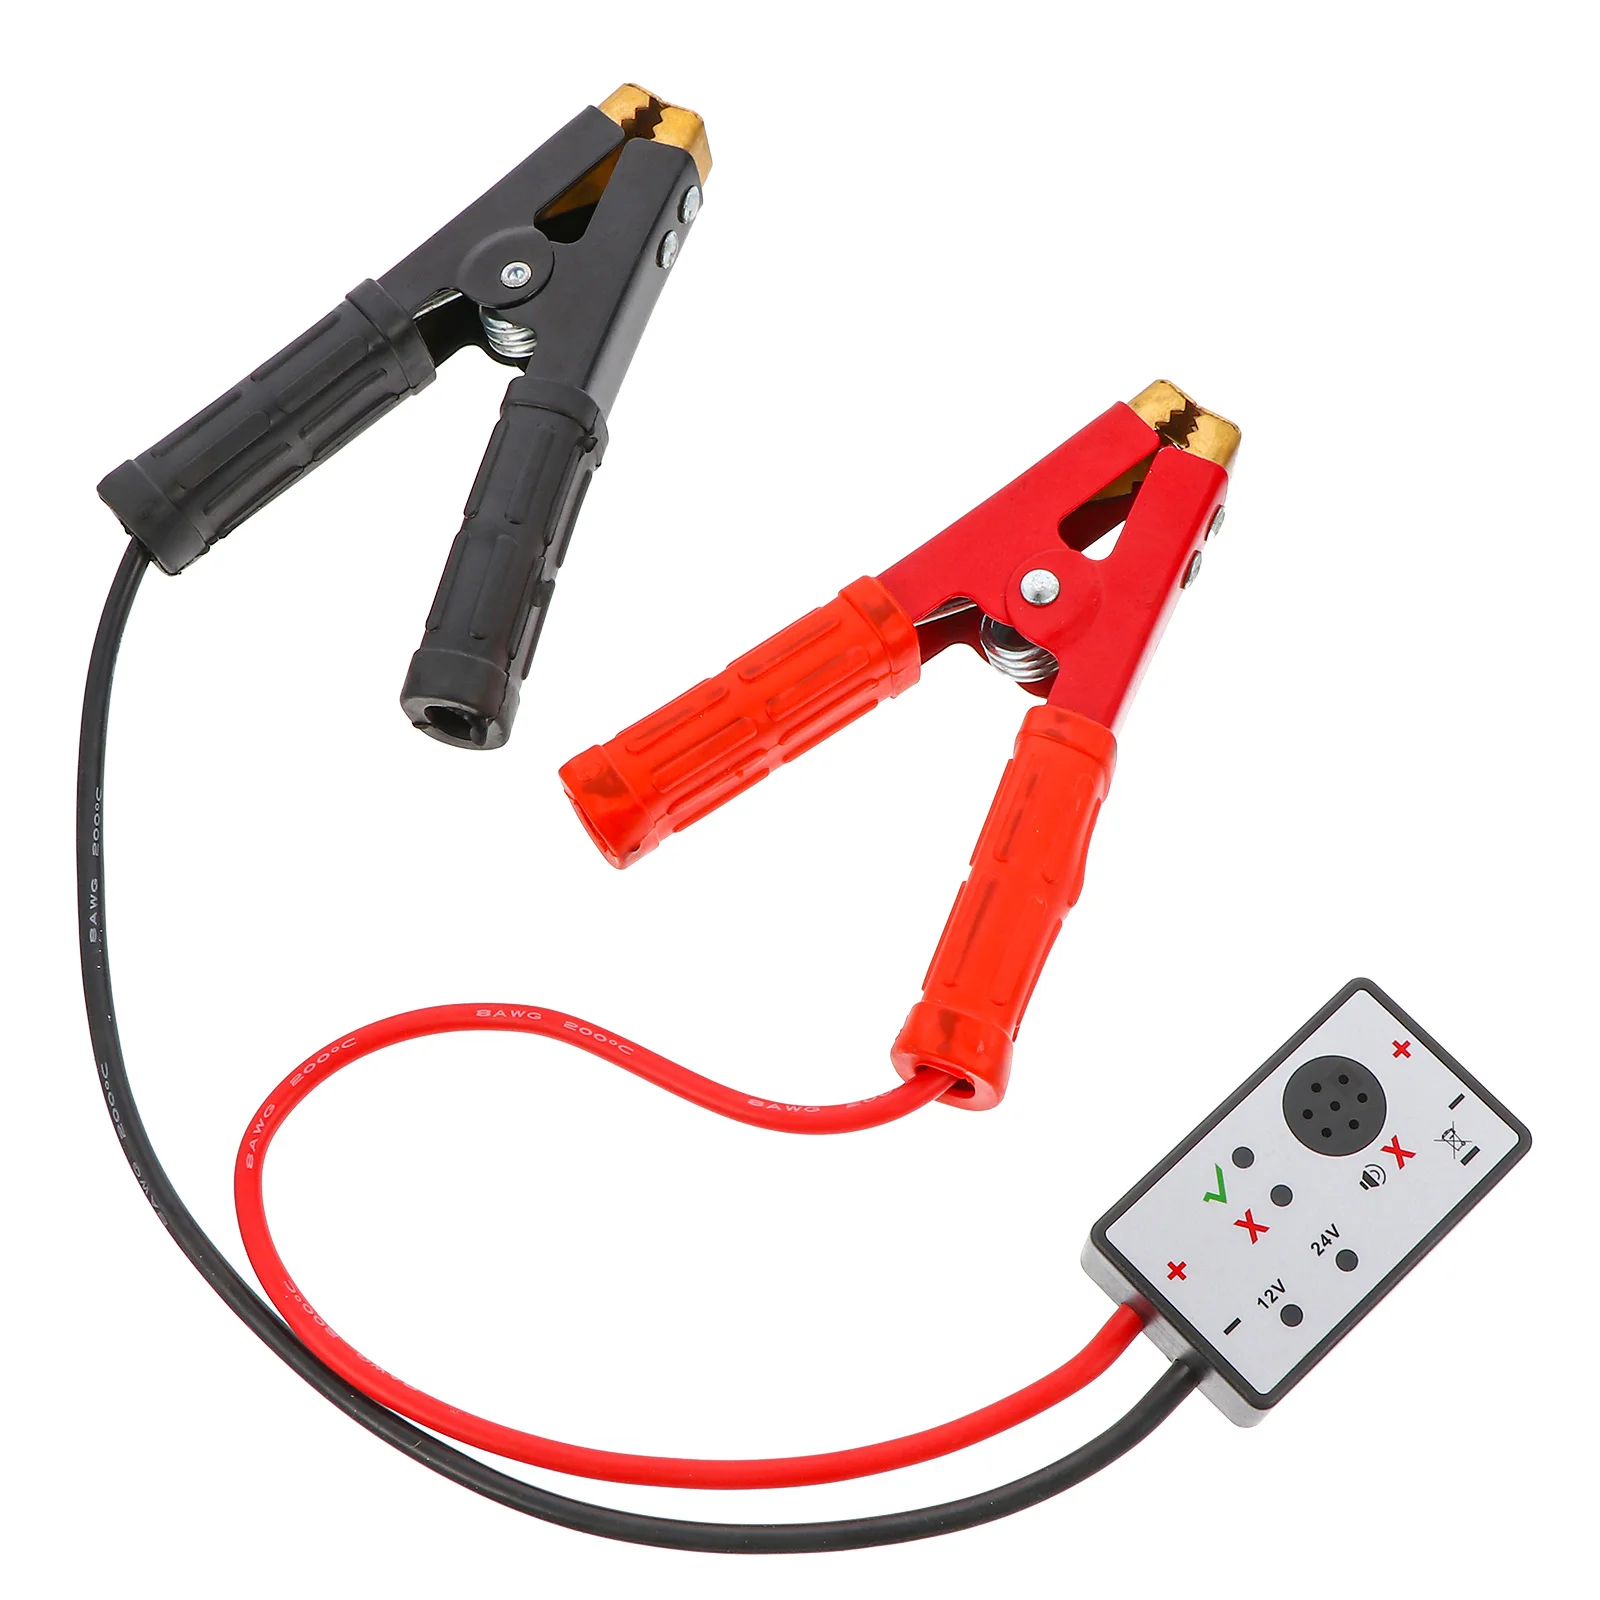 

Electronic Equipment Surge Protector Brake Tools Brakes Radios Tape Abs Car Line filter